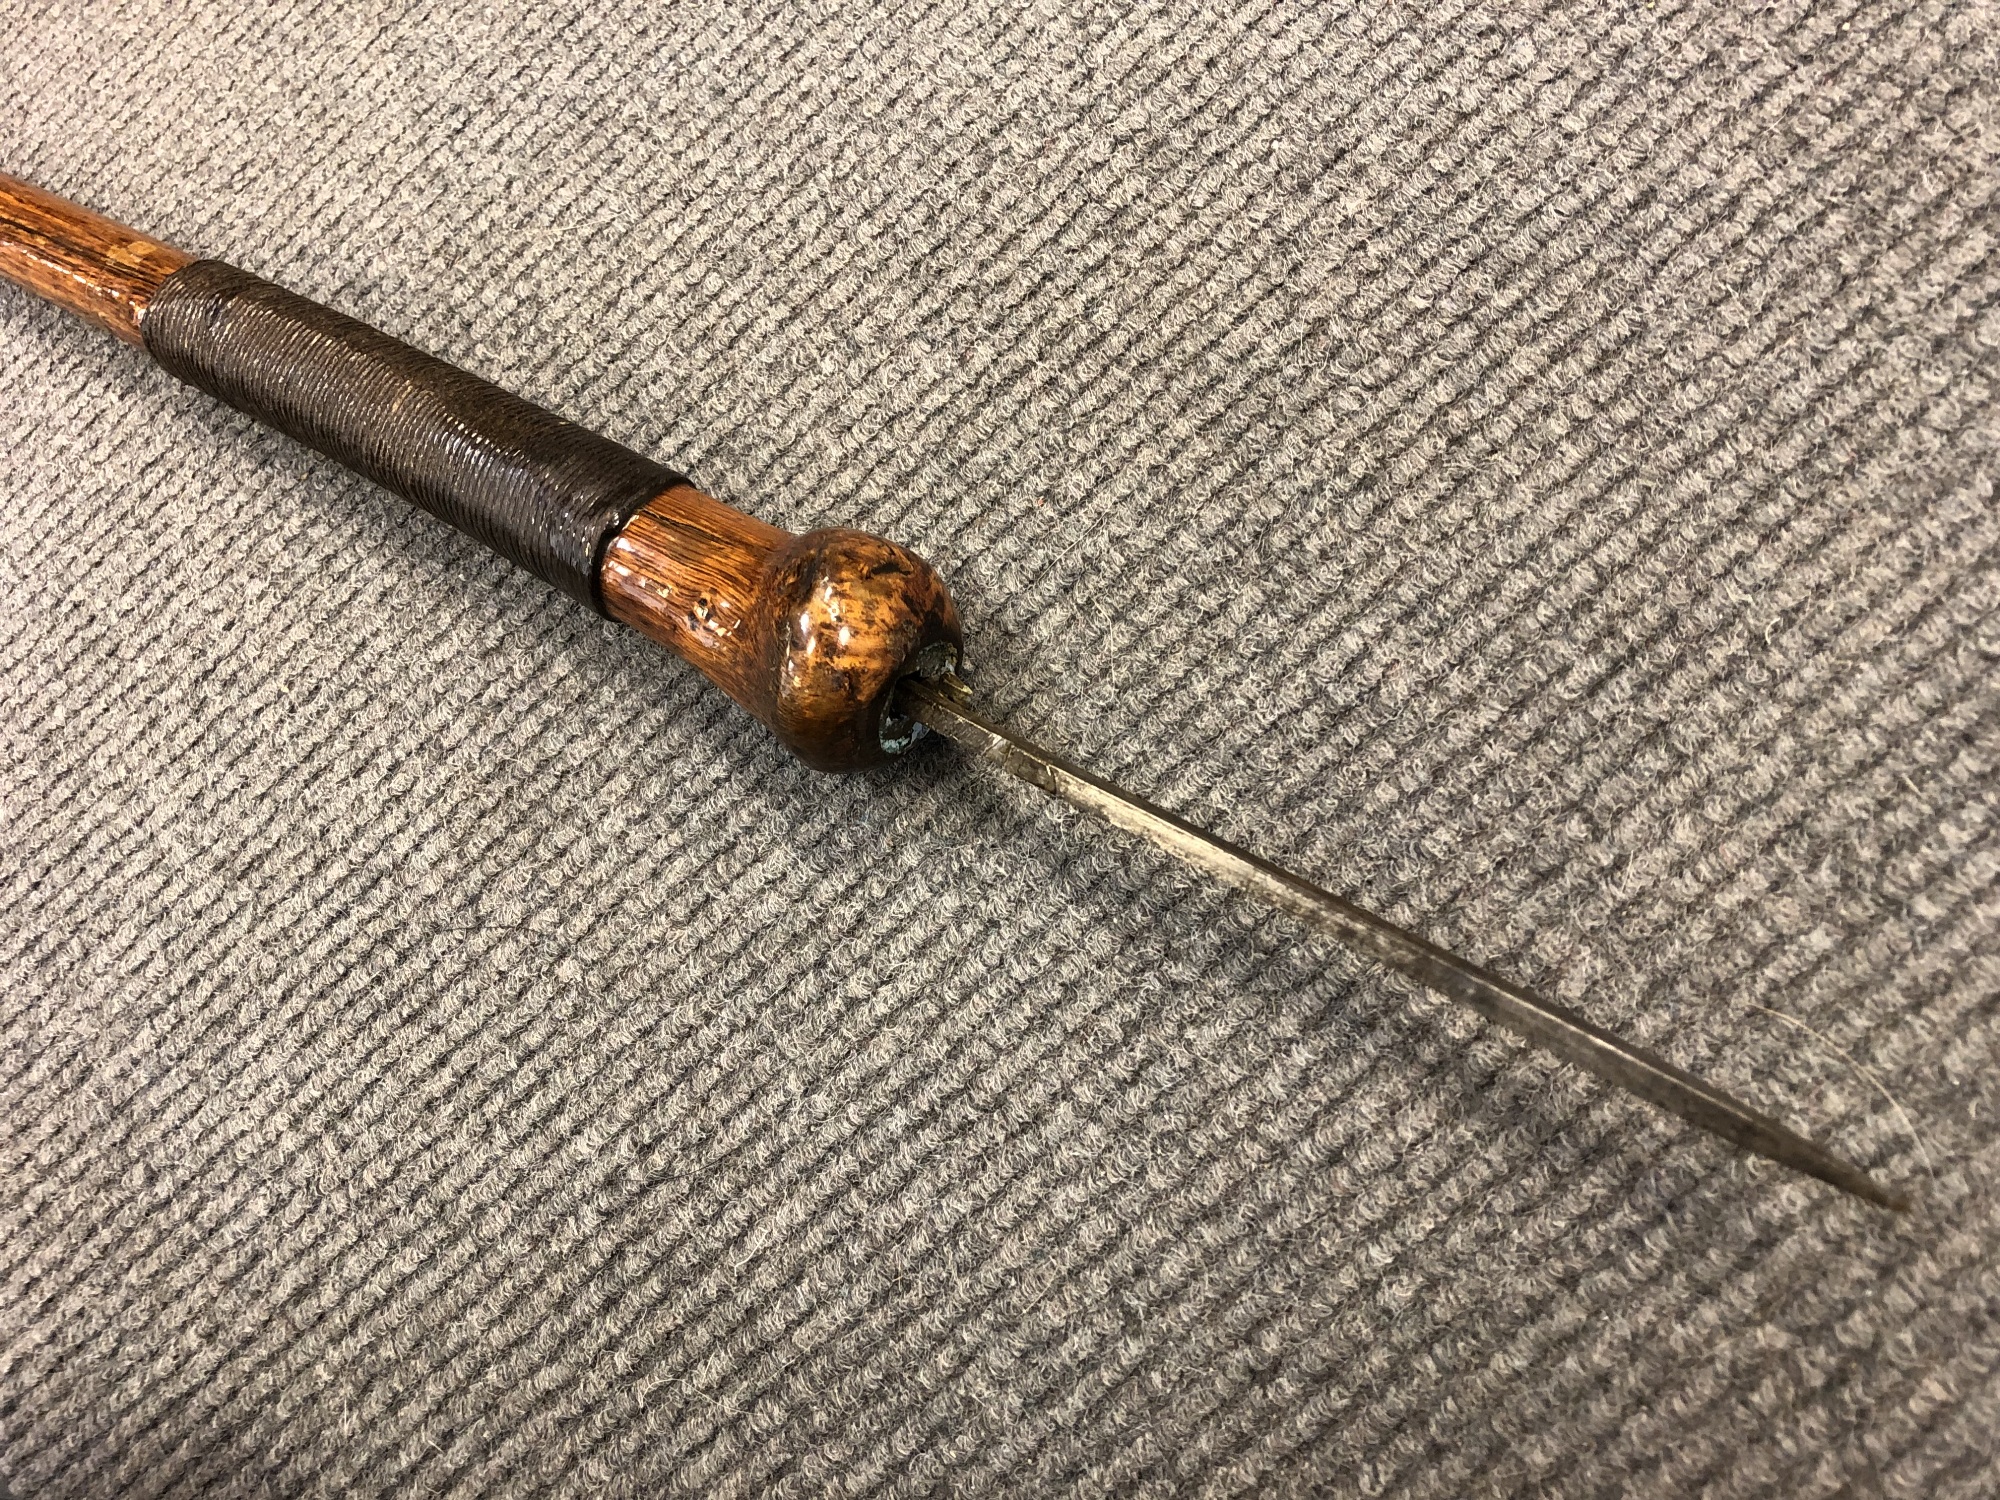 An early 20th century sword cane, with coin-inset pommel revealing a 15cm blade. - Image 3 of 3